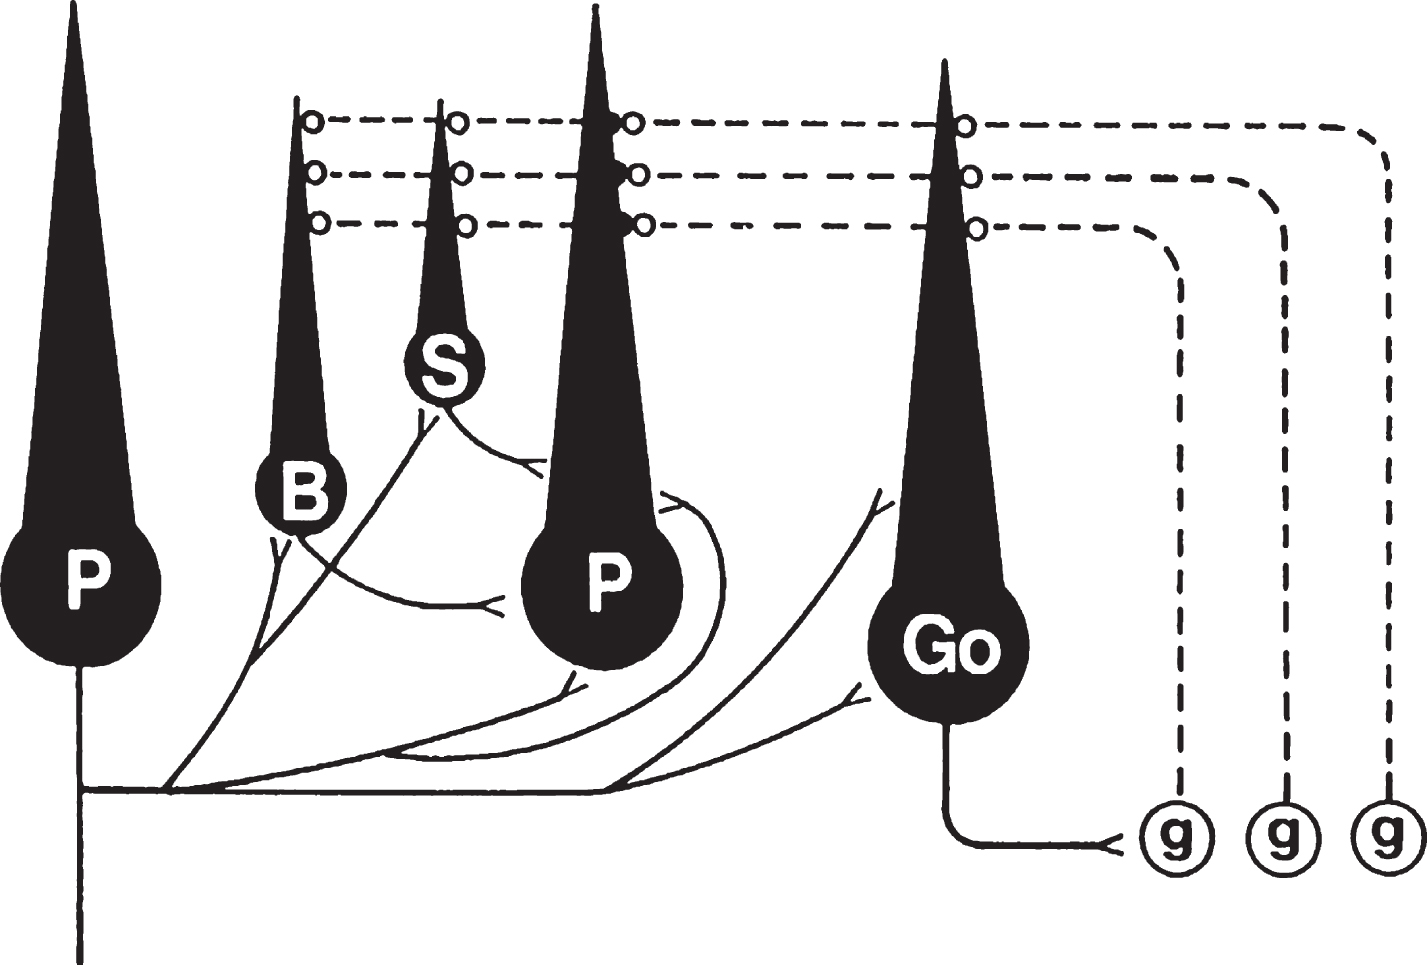 Circuit diagram of the major cerebellar cortical neurons and their projections. Not shown are the extracellular afferents, as they are absent in isolated organotypic cerebellar cultures. Inhibitory projections, shown as solid black lines, from Purkinje cells (P) are illustrated on the Purkinje cell on the left side of the diagram, while projections to Purkinje cells are shown on the Purkinje cell in the center. Purkinje cells are the only cortical neurons that project axons from the cortex. Their axon collaterals project to all other inhibitory cortical neurons, including other Purkinje cells. Granule cells (g) are the only excitatory neurons in the cerebellar cortex and their projections, the parallel fibers (shown as dashed lines), project to the dendrites of all other cortical neurons. Basket cell (B) axons project to Purkinje cell somata and proximal dendrites, while stellate cell (S) axons innervate more distal portions of Purkinje cell dendrites. Golgi cells (G) project multibranched axons to the dendrites of granule cells. From reference 31 with permission.